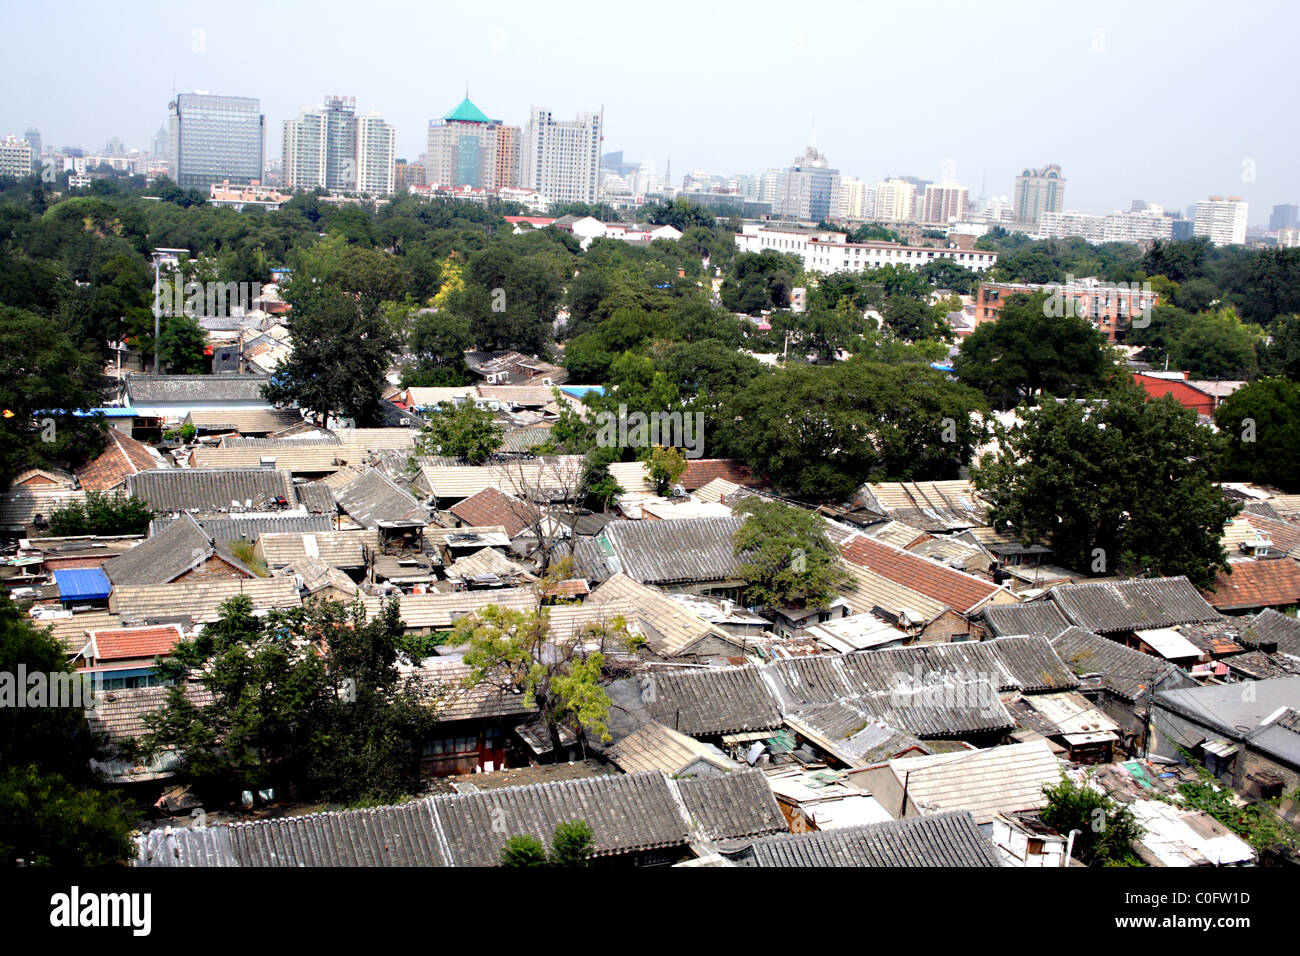 North Beijing, old Dongcheng district, looking over at the new Beijing and its high-rise buildings. Stock Photo